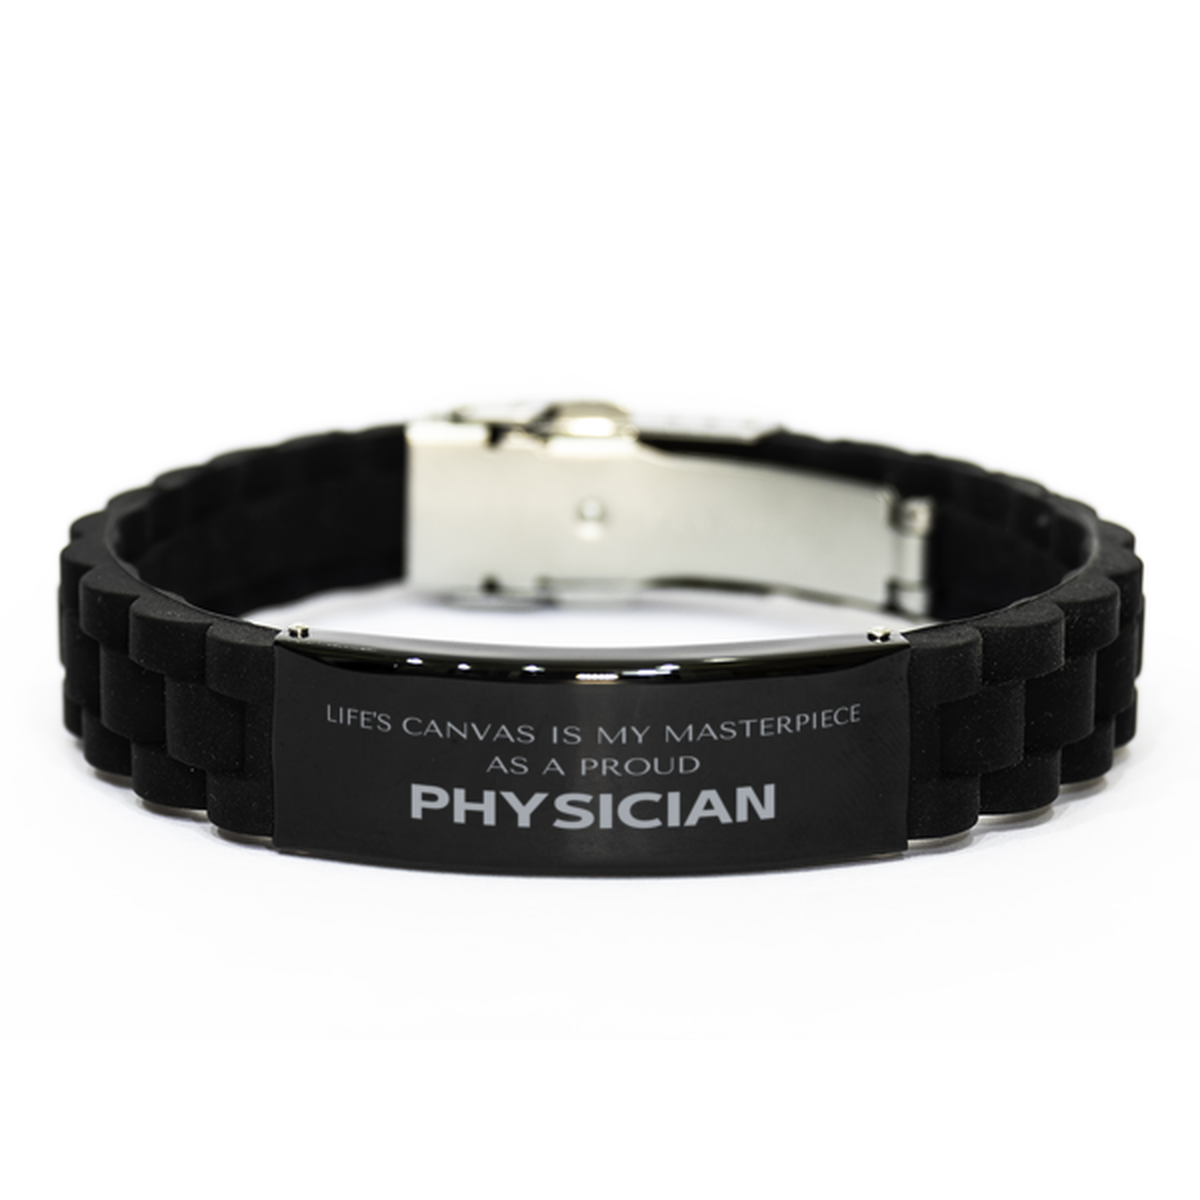 Proud Physician Gifts, Life's canvas is my masterpiece, Epic Birthday Christmas Unique Black Glidelock Clasp Bracelet For Physician, Coworkers, Men, Women, Friends